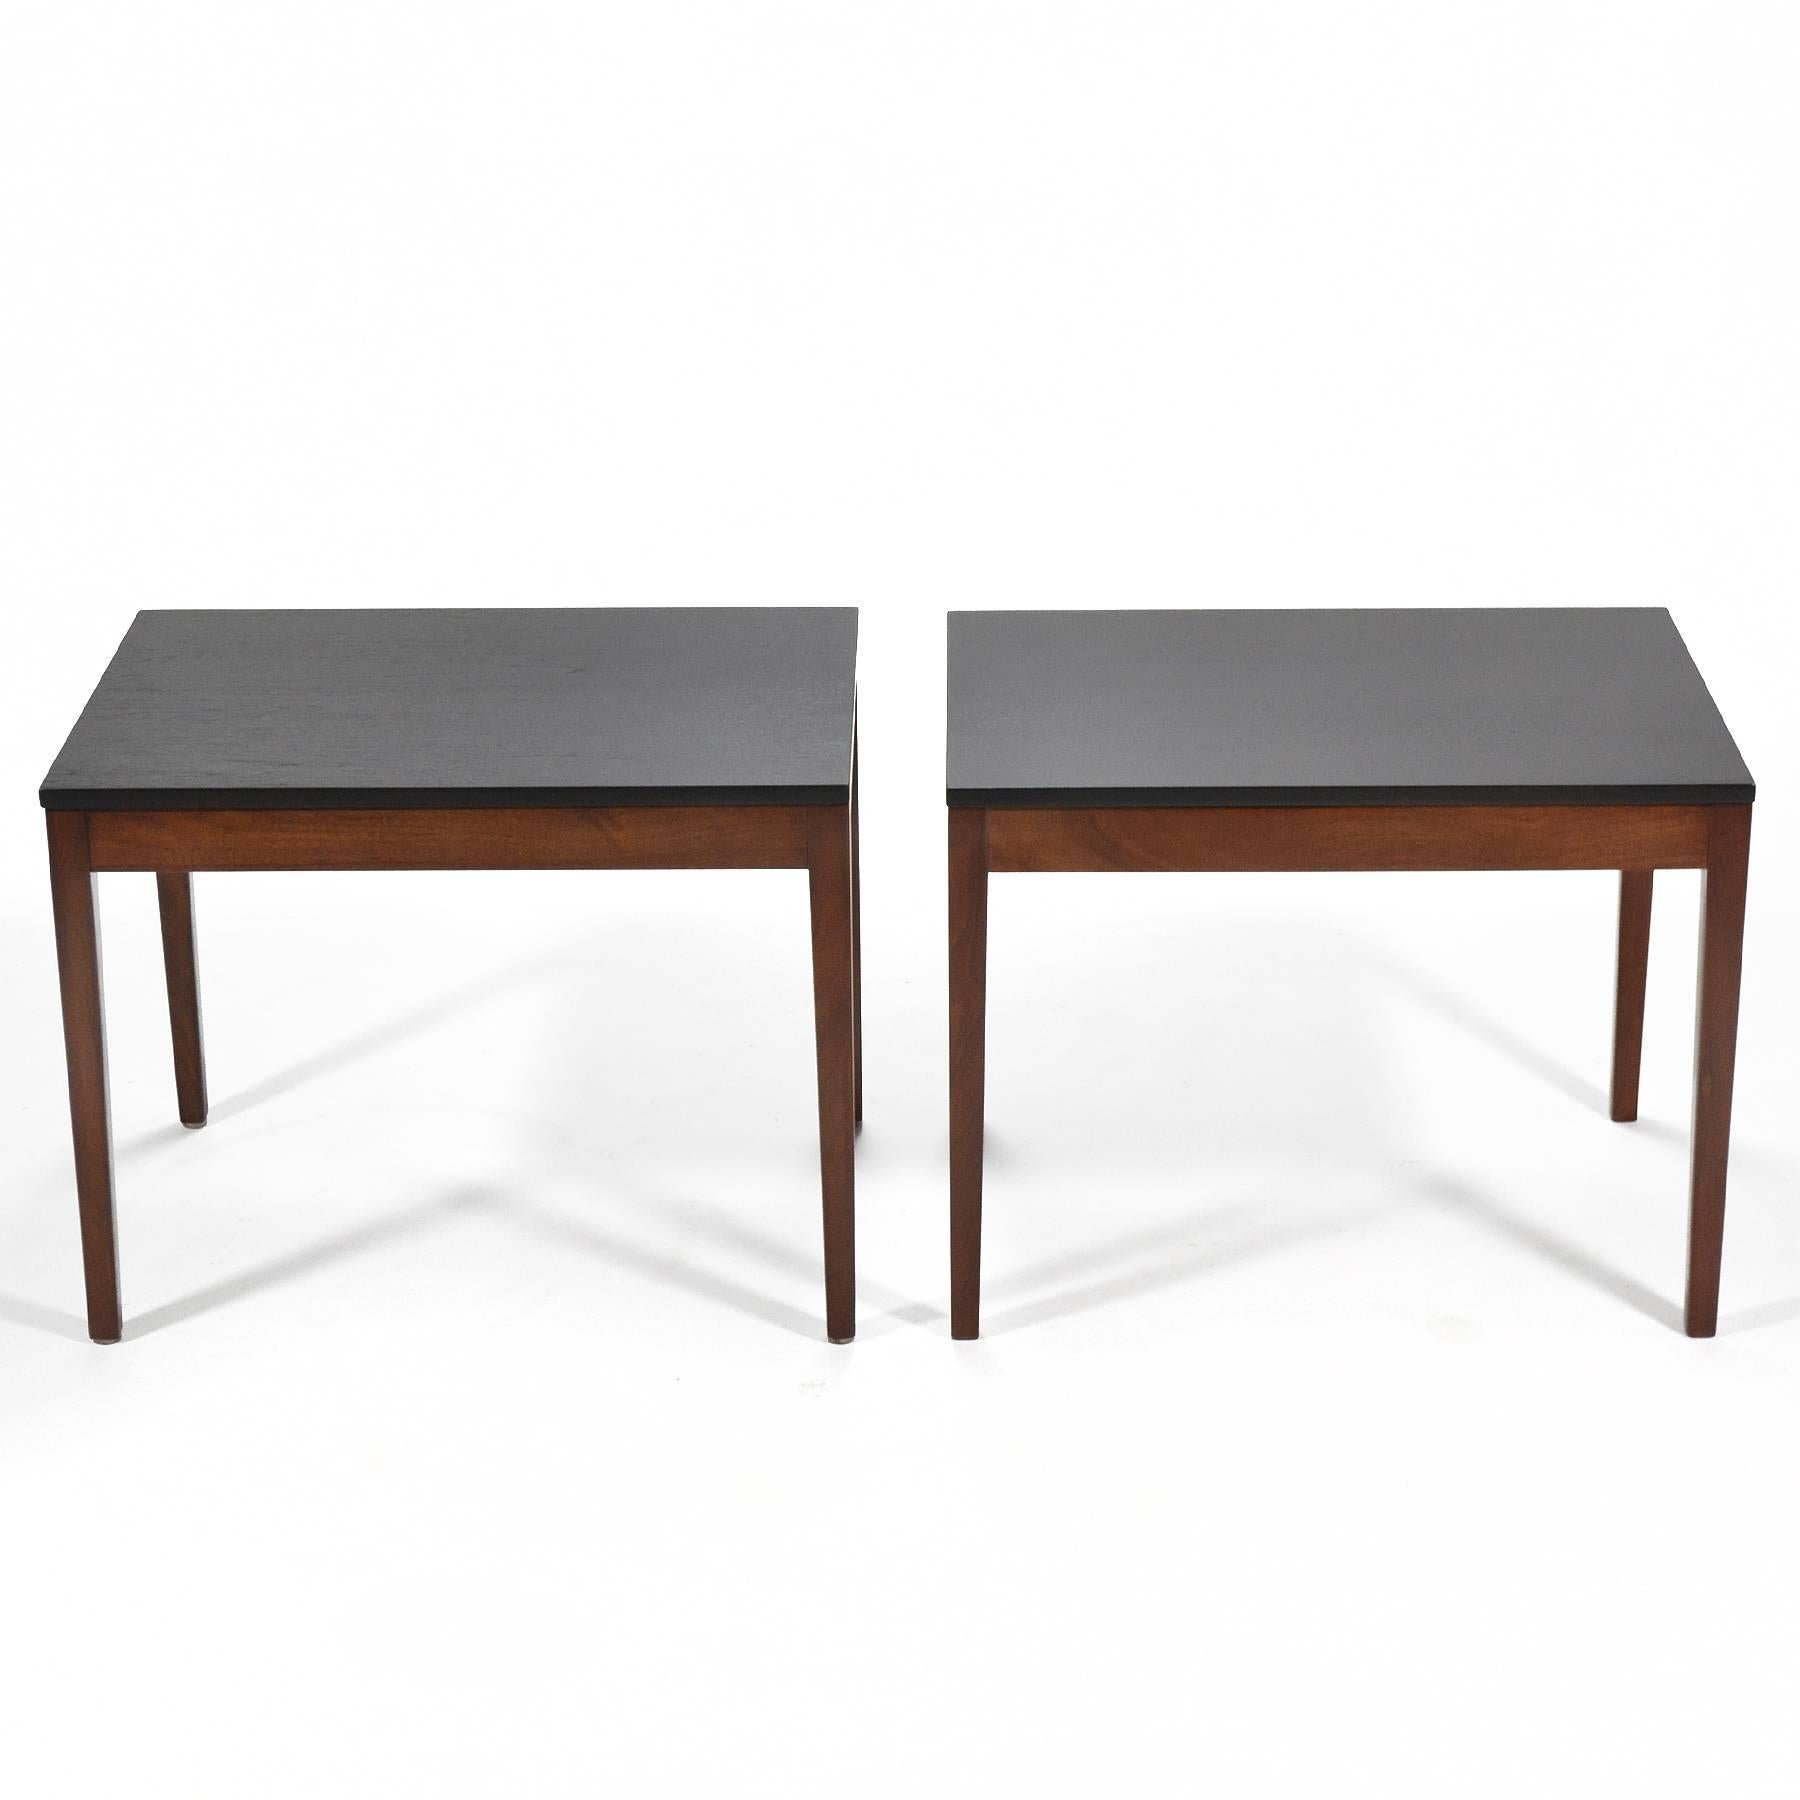 This very clean-lined pair of side or end tables by George Nelson are walnut with ebonized tops. They are typical of Nelson's rational design sensibility. Newly refinished, they are ready to use.